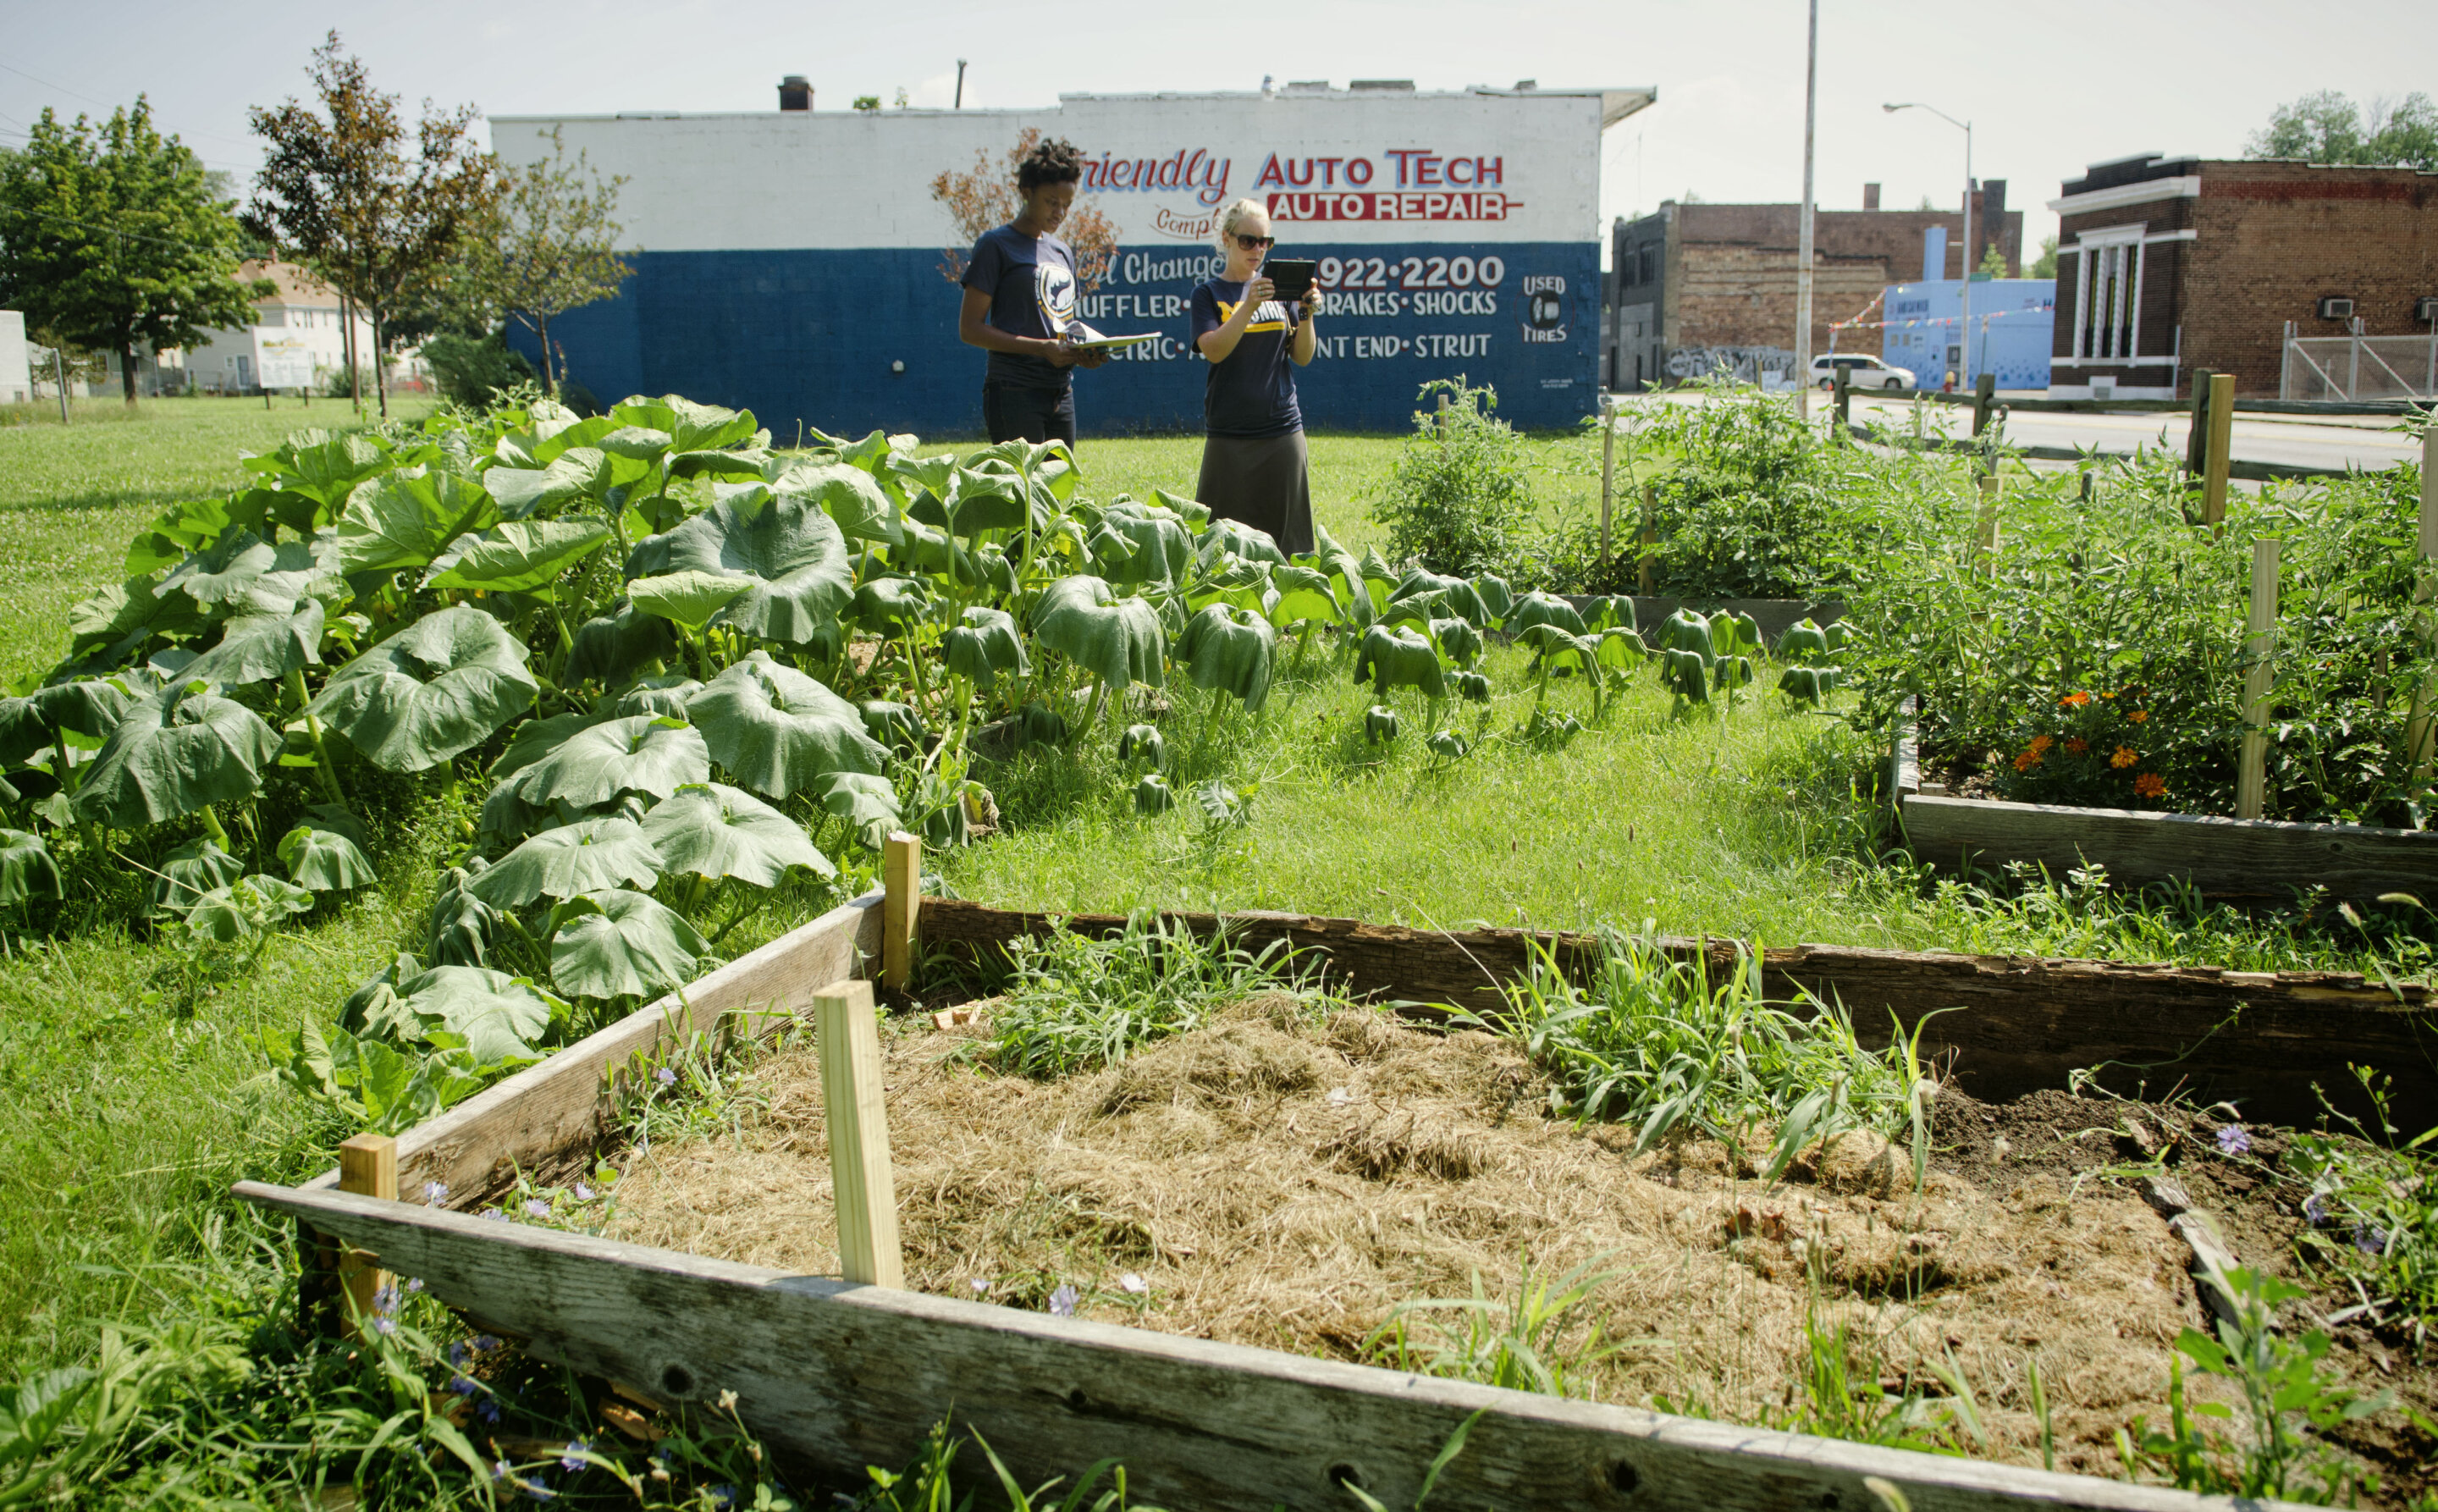 Food from Urban Agriculture Has Carbon Footprint 6 Times Larger Than Conventional Produce